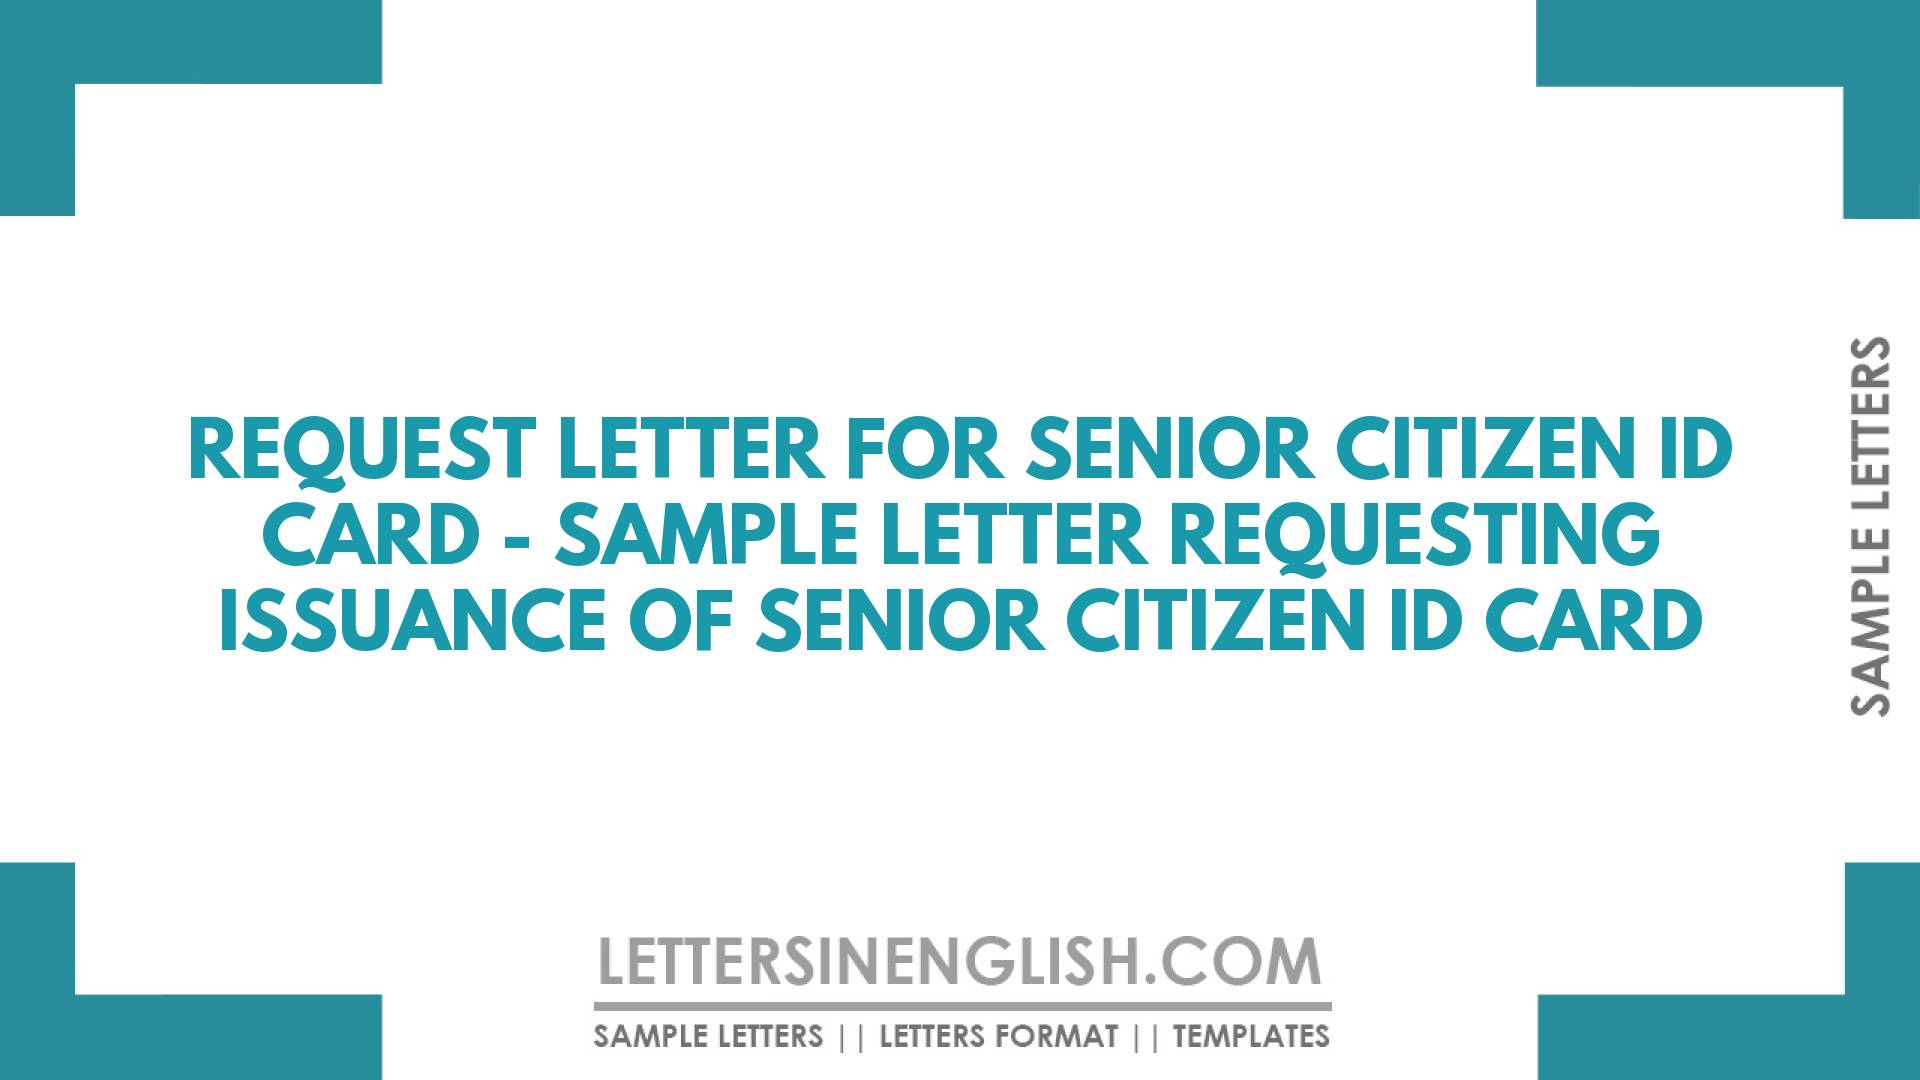 Request Letter For Senior Citizen Id Card Sample Letter Requesting Issuance Of Senior Citizen 7730